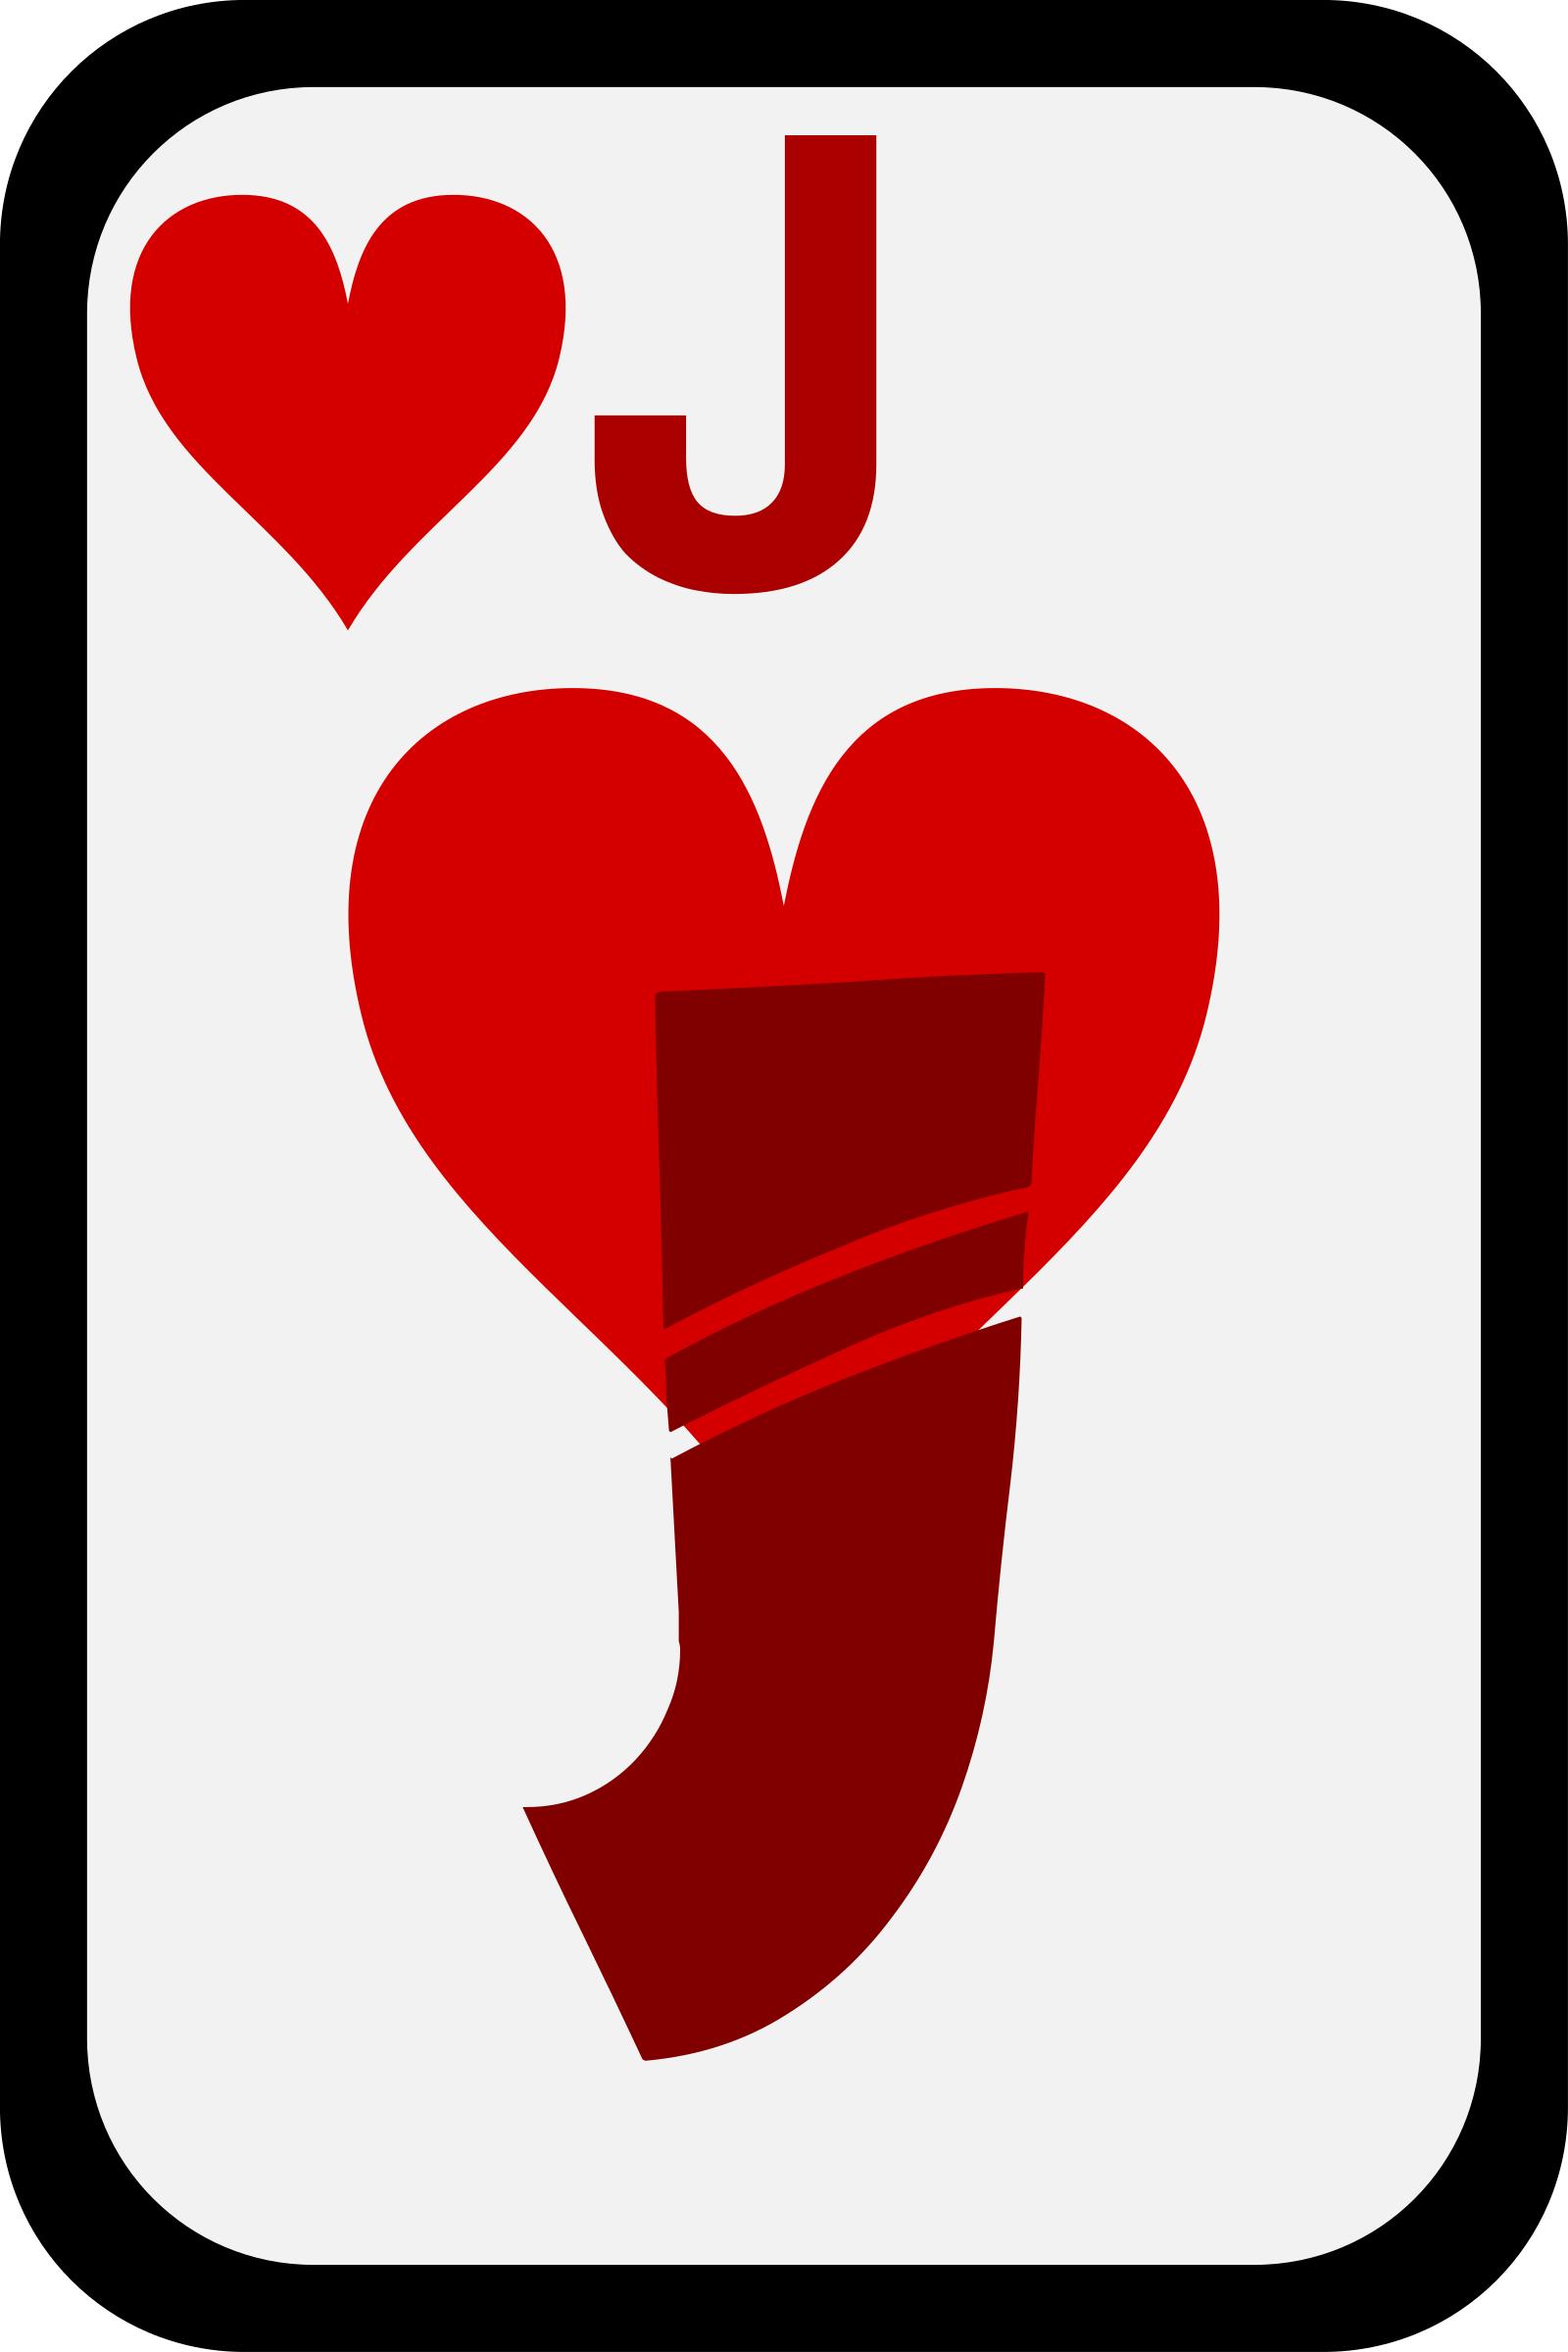 Jack of Hearts png